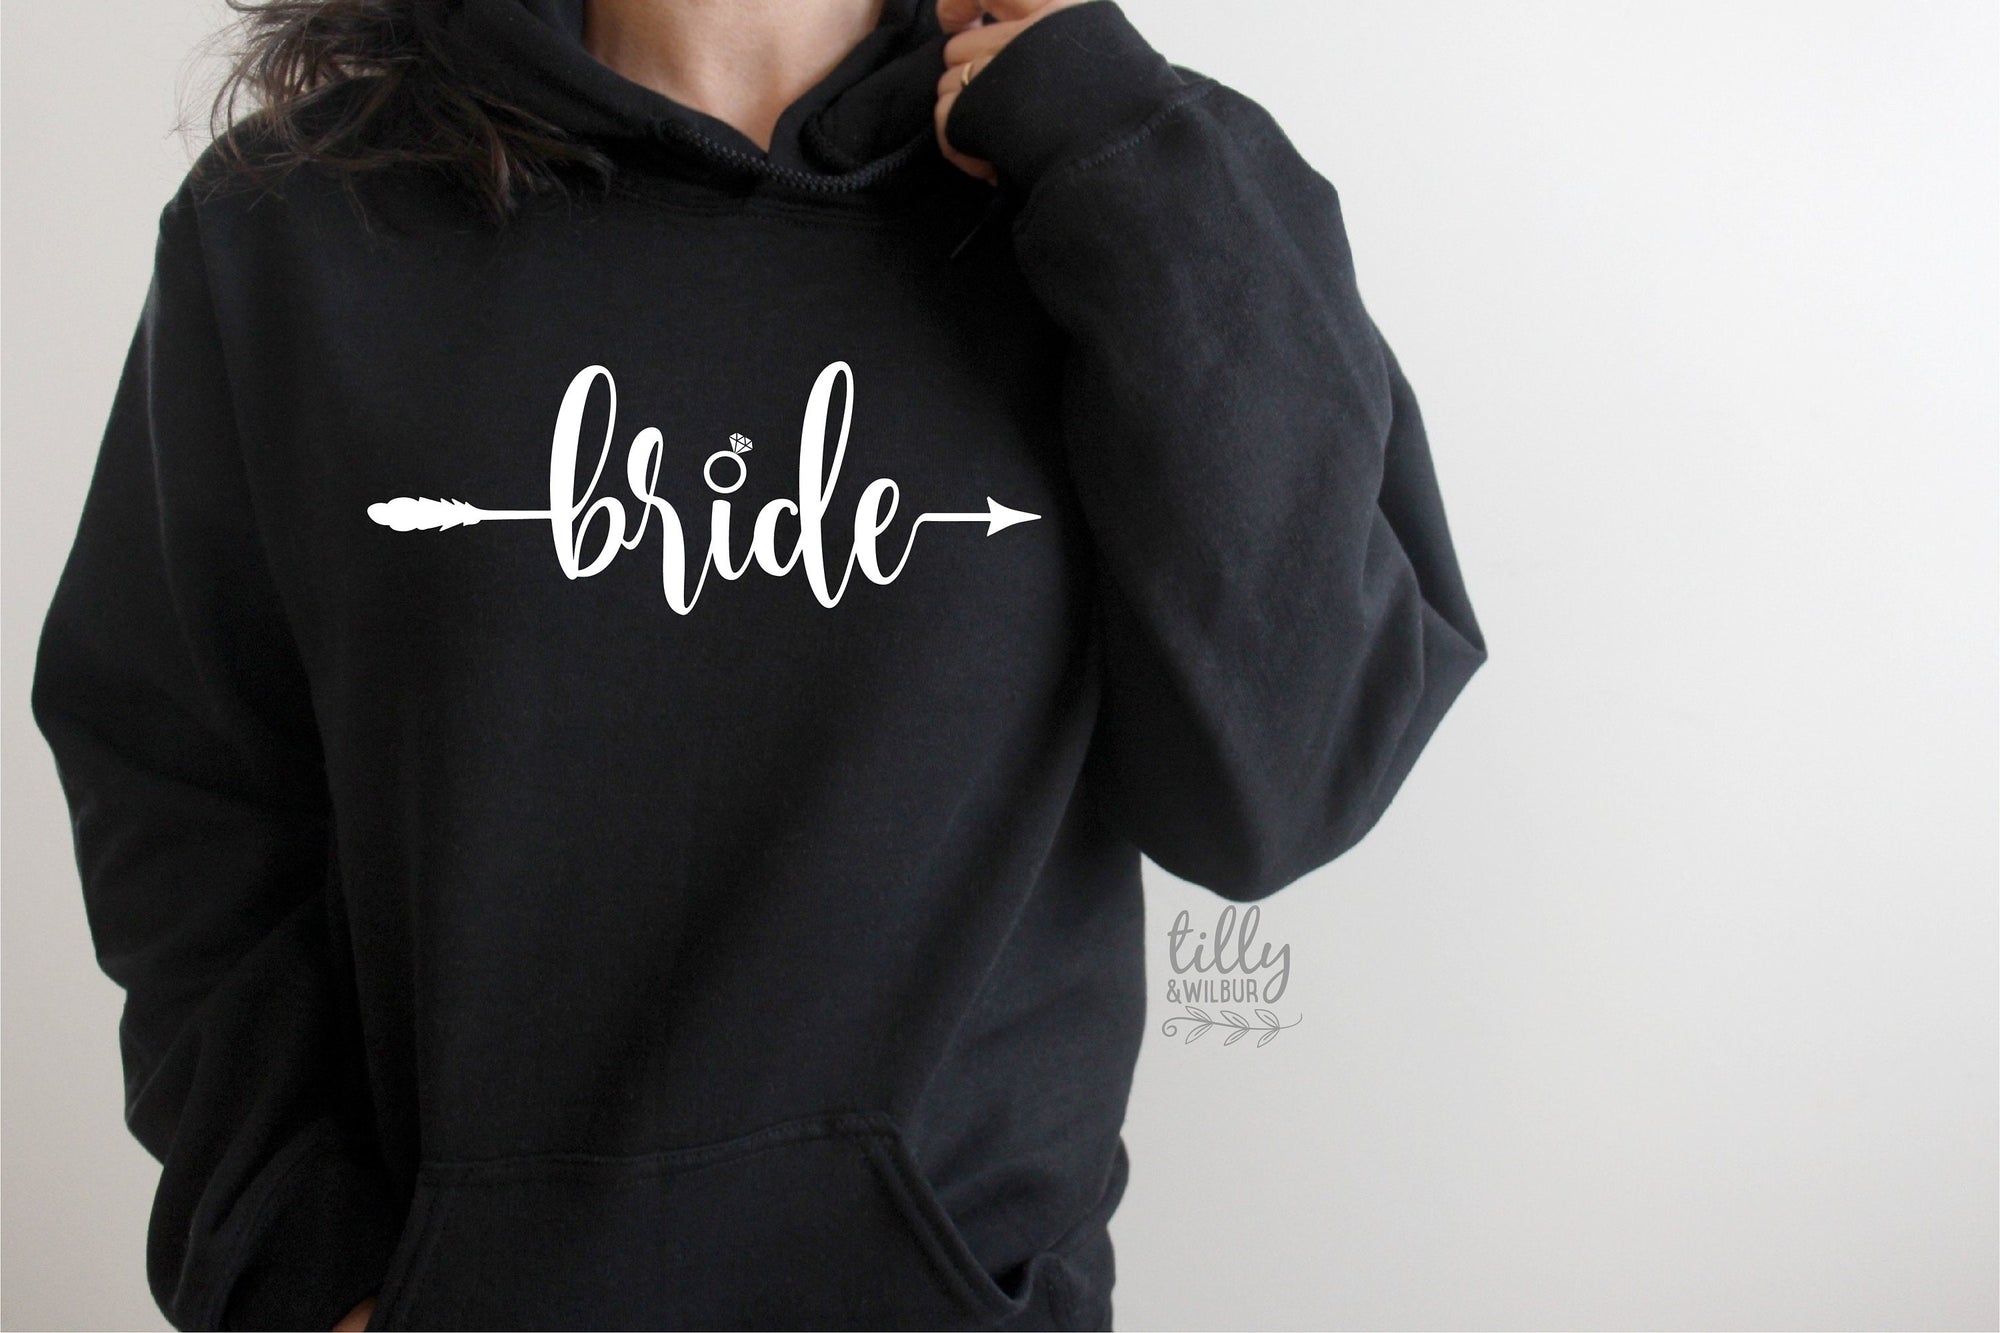 Bride Women's Hoodie, Wedding Gift, Wedding Party, Bridal Party, Newlywed, His and Hers, Bride T-Shirt, Hens Night, Bride-To-Be, Bride Tee